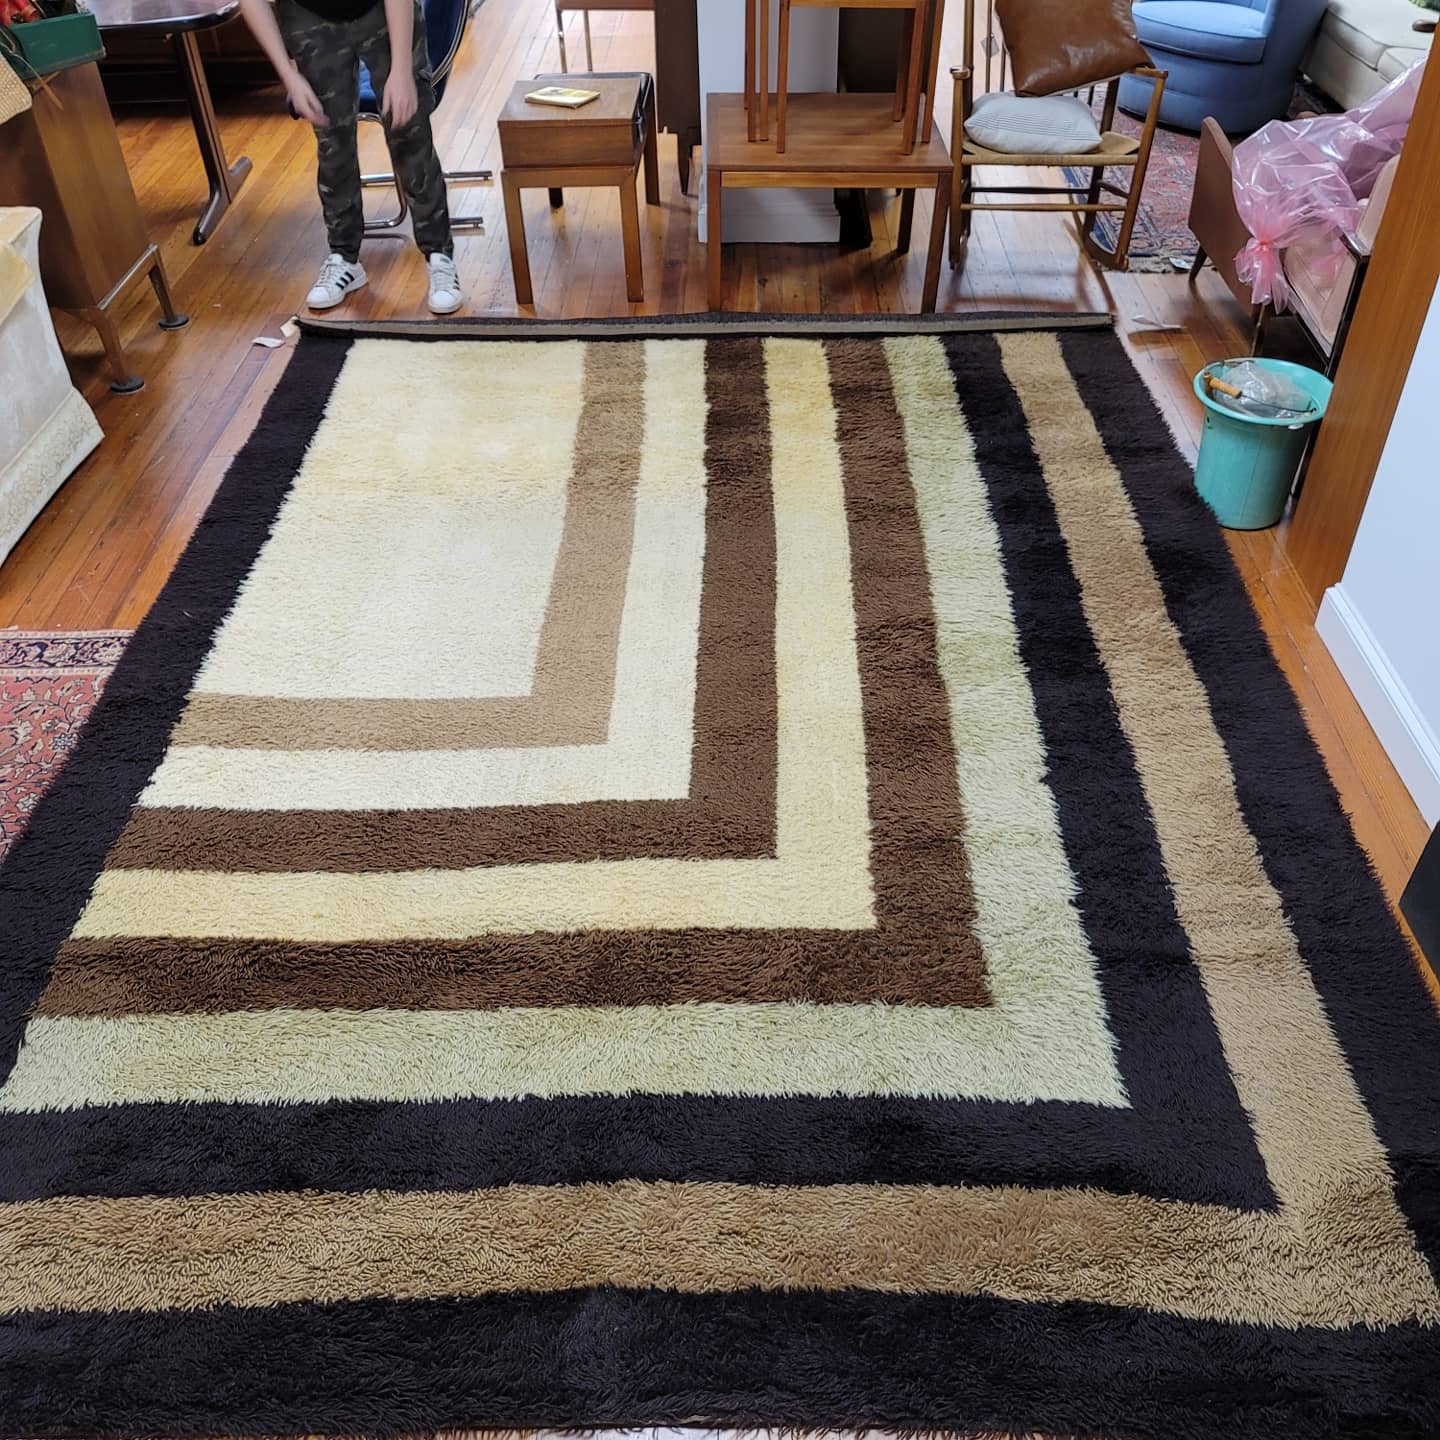 "Barry" Brown, Black and Cream Room-Size 70s Vintage Shag Rug